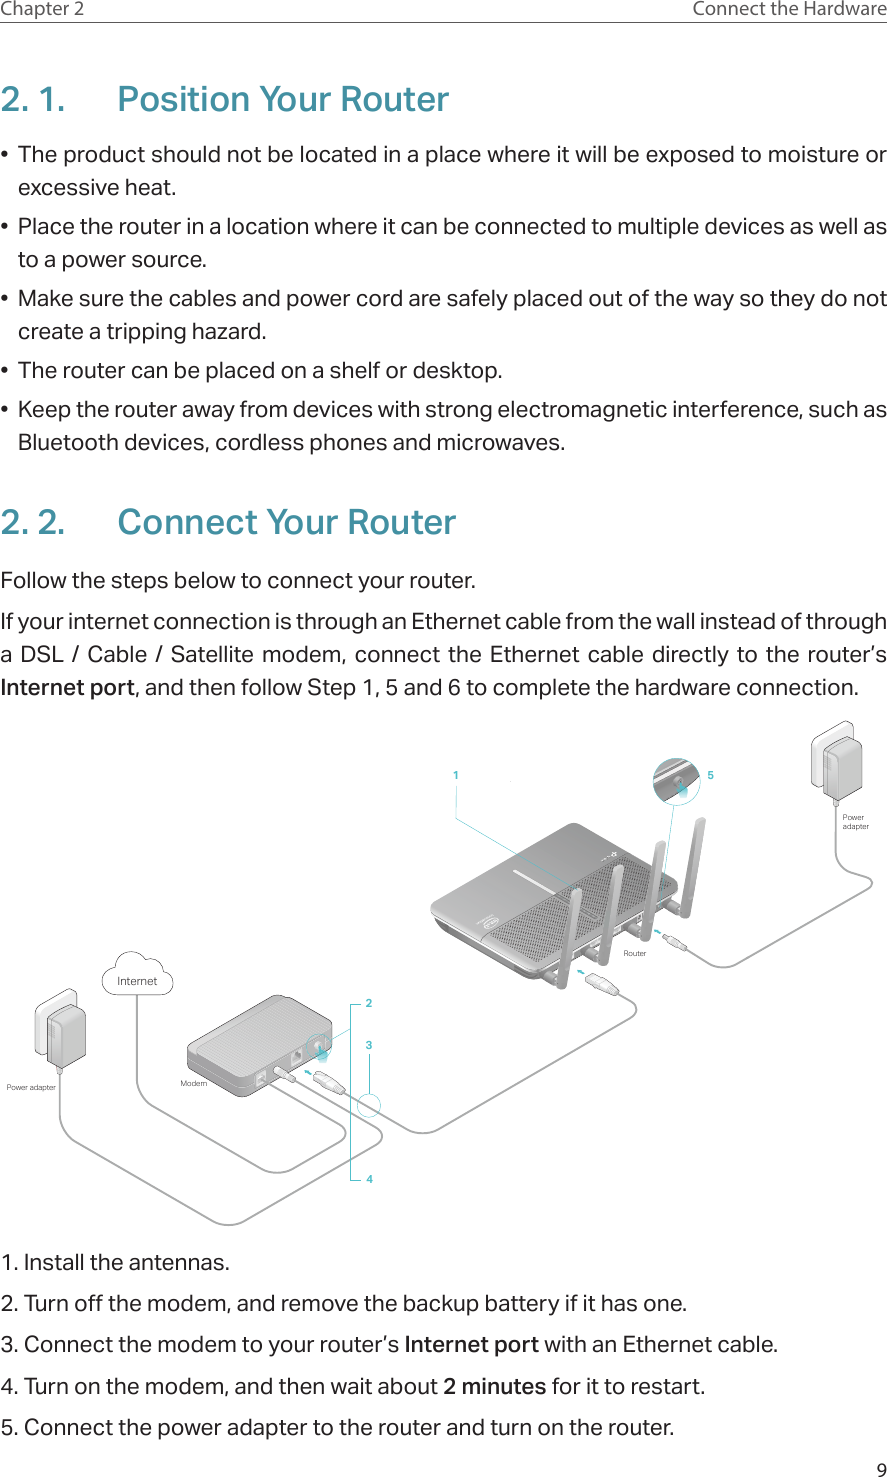 9Chapter 2 Connect the Hardware2. 1.  Position Your Router•  The product should not be located in a place where it will be exposed to moisture or excessive heat.•  Place the router in a location where it can be connected to multiple devices as well as to a power source.•  Make sure the cables and power cord are safely placed out of the way so they do not create a tripping hazard.•  The router can be placed on a shelf or desktop.•  Keep the router away from devices with strong electromagnetic interference, such as Bluetooth devices, cordless phones and microwaves.2. 2.  Connect Your RouterFollow the steps below to connect your router.If your internet connection is through an Ethernet cable from the wall instead of through a DSL / Cable / Satellite modem, connect the Ethernet cable directly to the router’s Internet port, and then follow Step 1, 5 and 6 to complete the hardware connection.ModemPower adapter234InternetPower adapterRouter151. Install the antennas.2. Turn off the modem, and remove the backup battery if it has one.3. Connect the modem to your router’s Internet port with an Ethernet cable.4. Turn on the modem, and then wait about 2 minutes for it to restart.5. Connect the power adapter to the router and turn on the router.